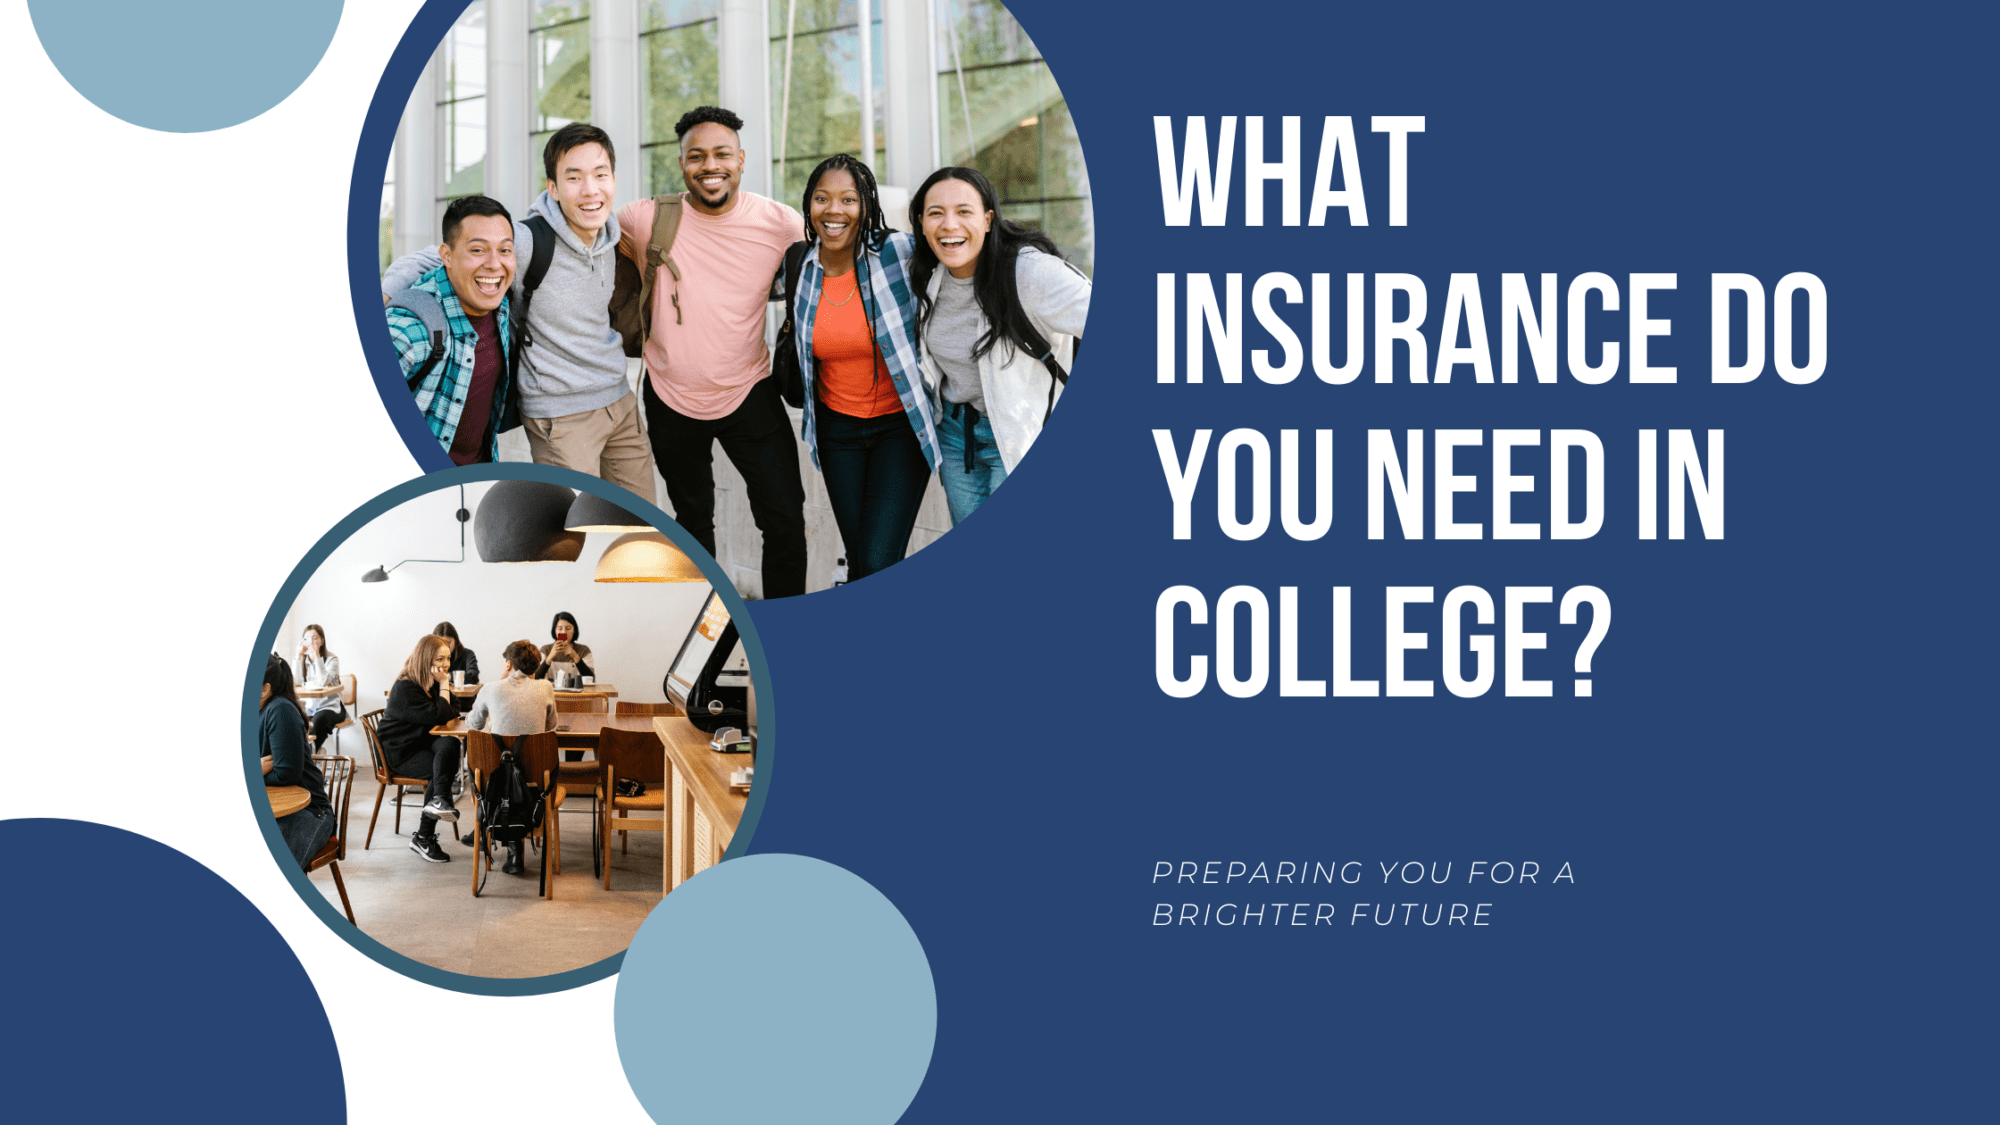 What Insurance do you need in college?